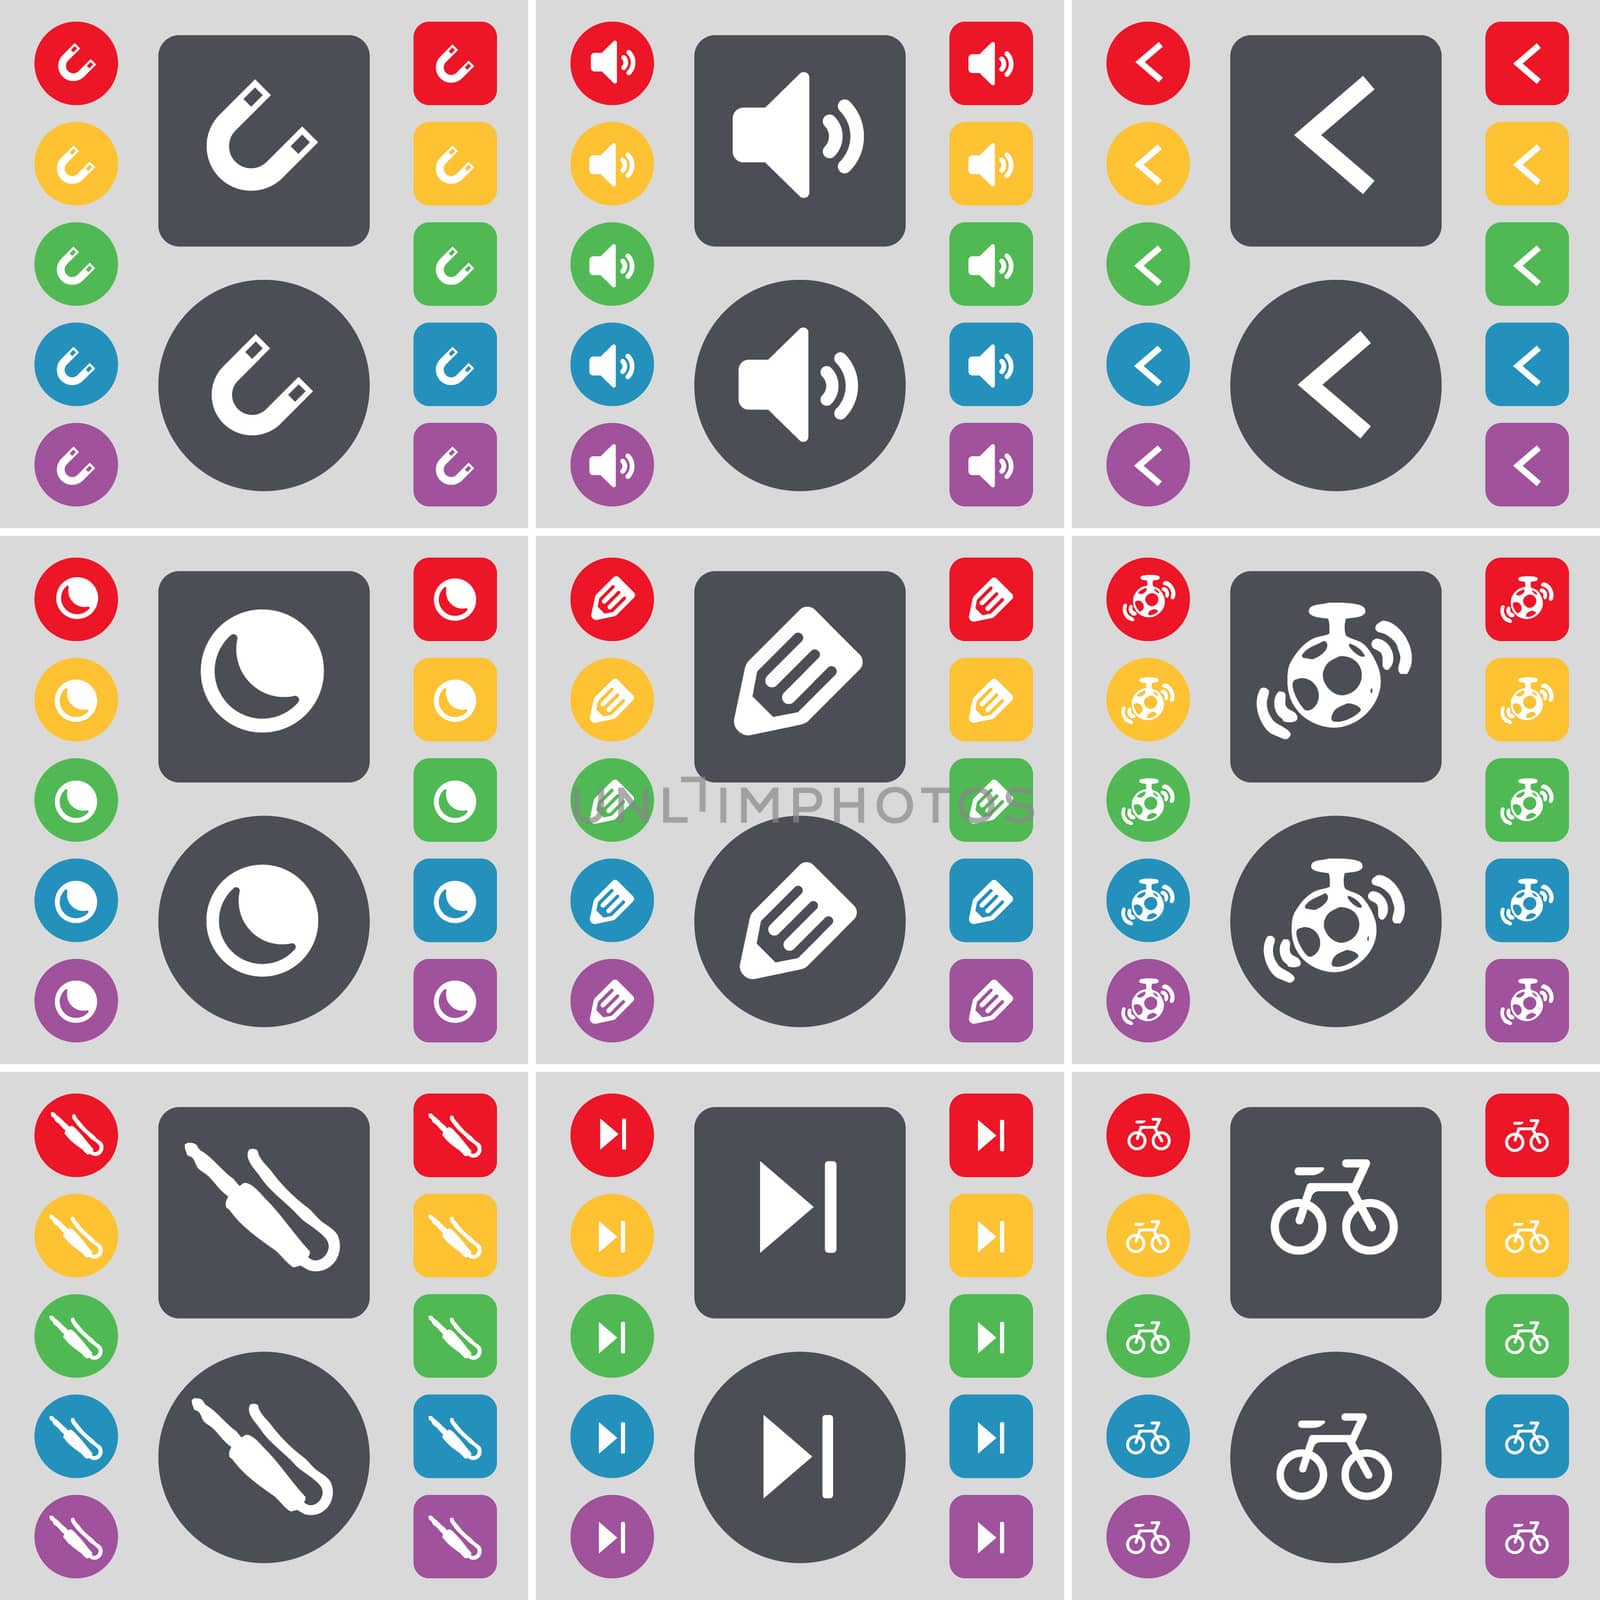 Magnet, Sound, Arrow left, Moon, Pencil, Speaker, Microphone connector, Media skip, Bicycle icon symbol. A large set of flat, colored buttons for your design.  by serhii_lohvyniuk